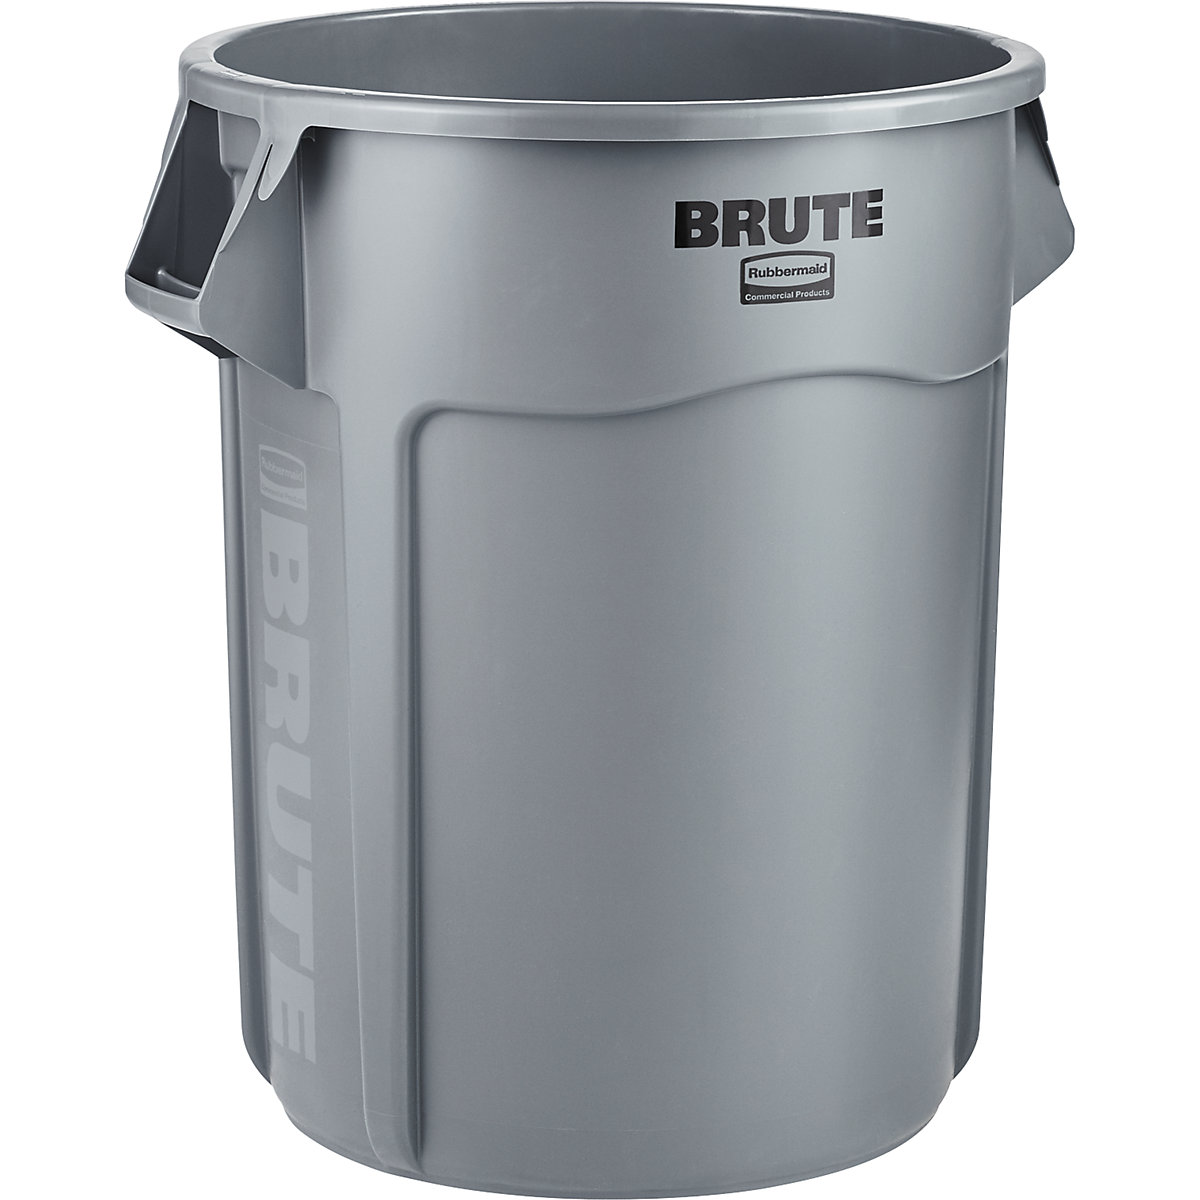 BRUTE® universal container, round – Rubbermaid